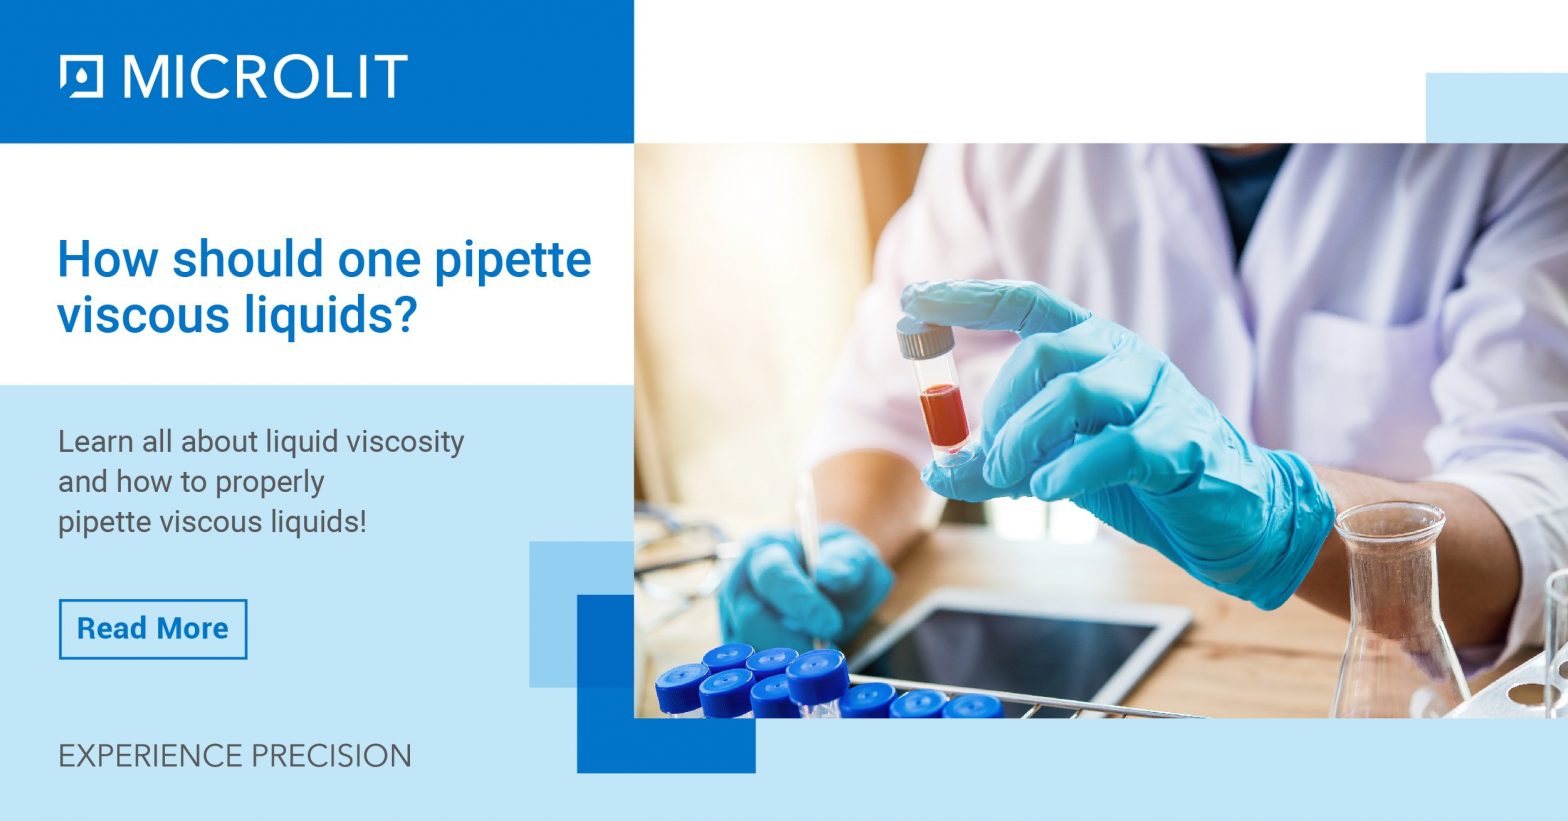 How does the viscosity of the liquid affect pipetting accuracy